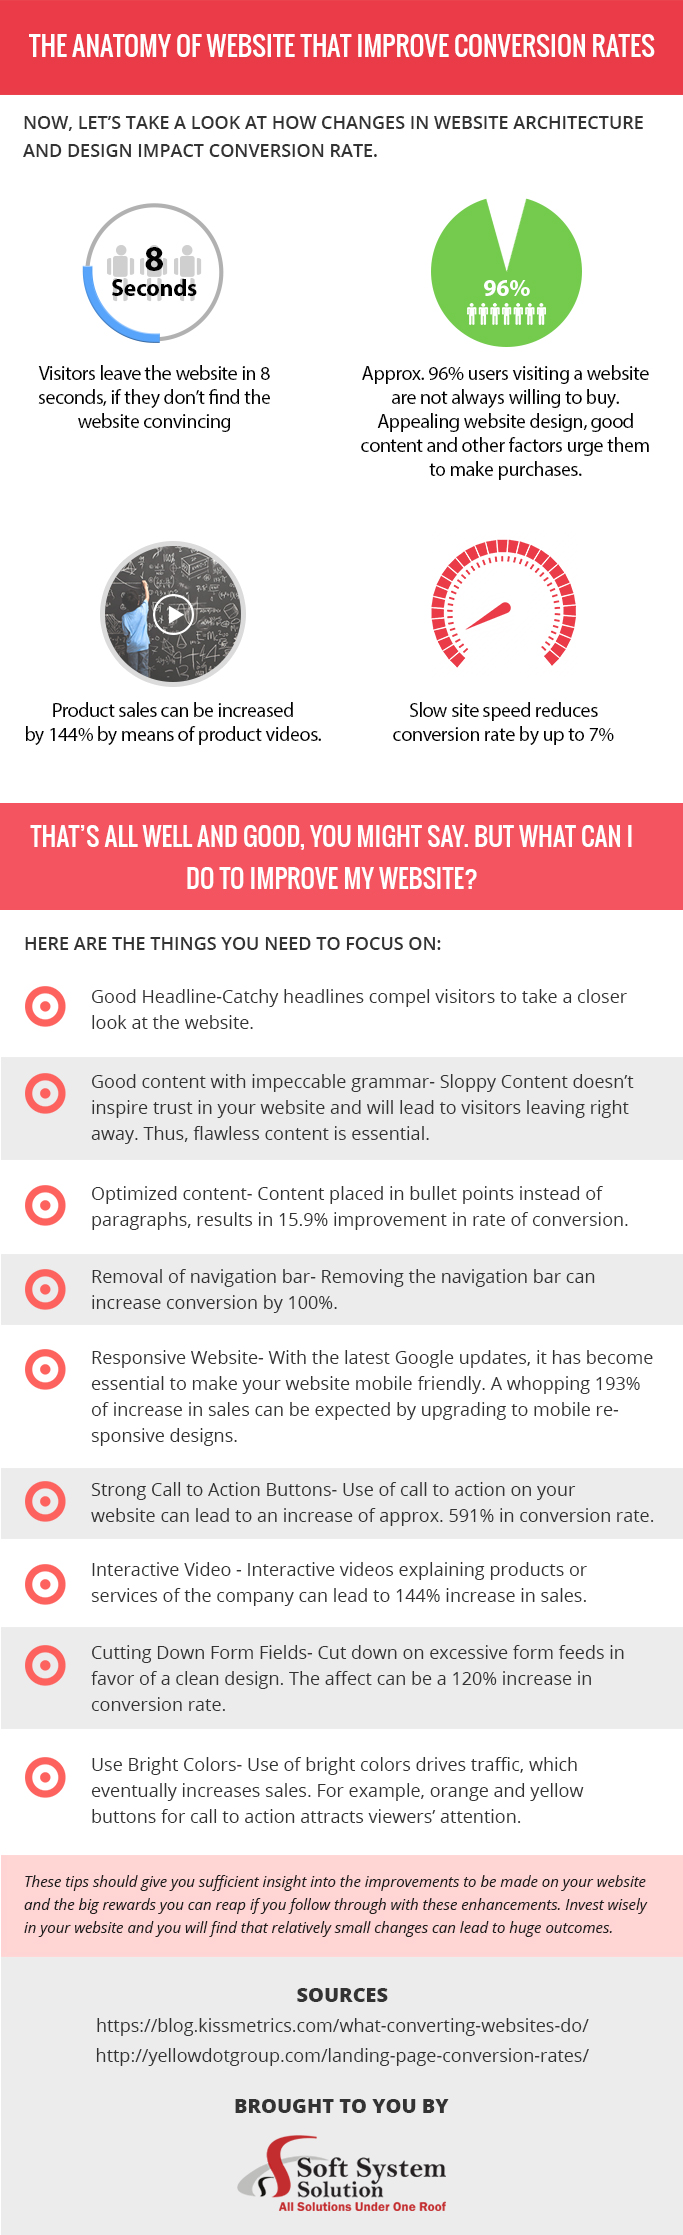 The anatomy of website that improve conversion rates